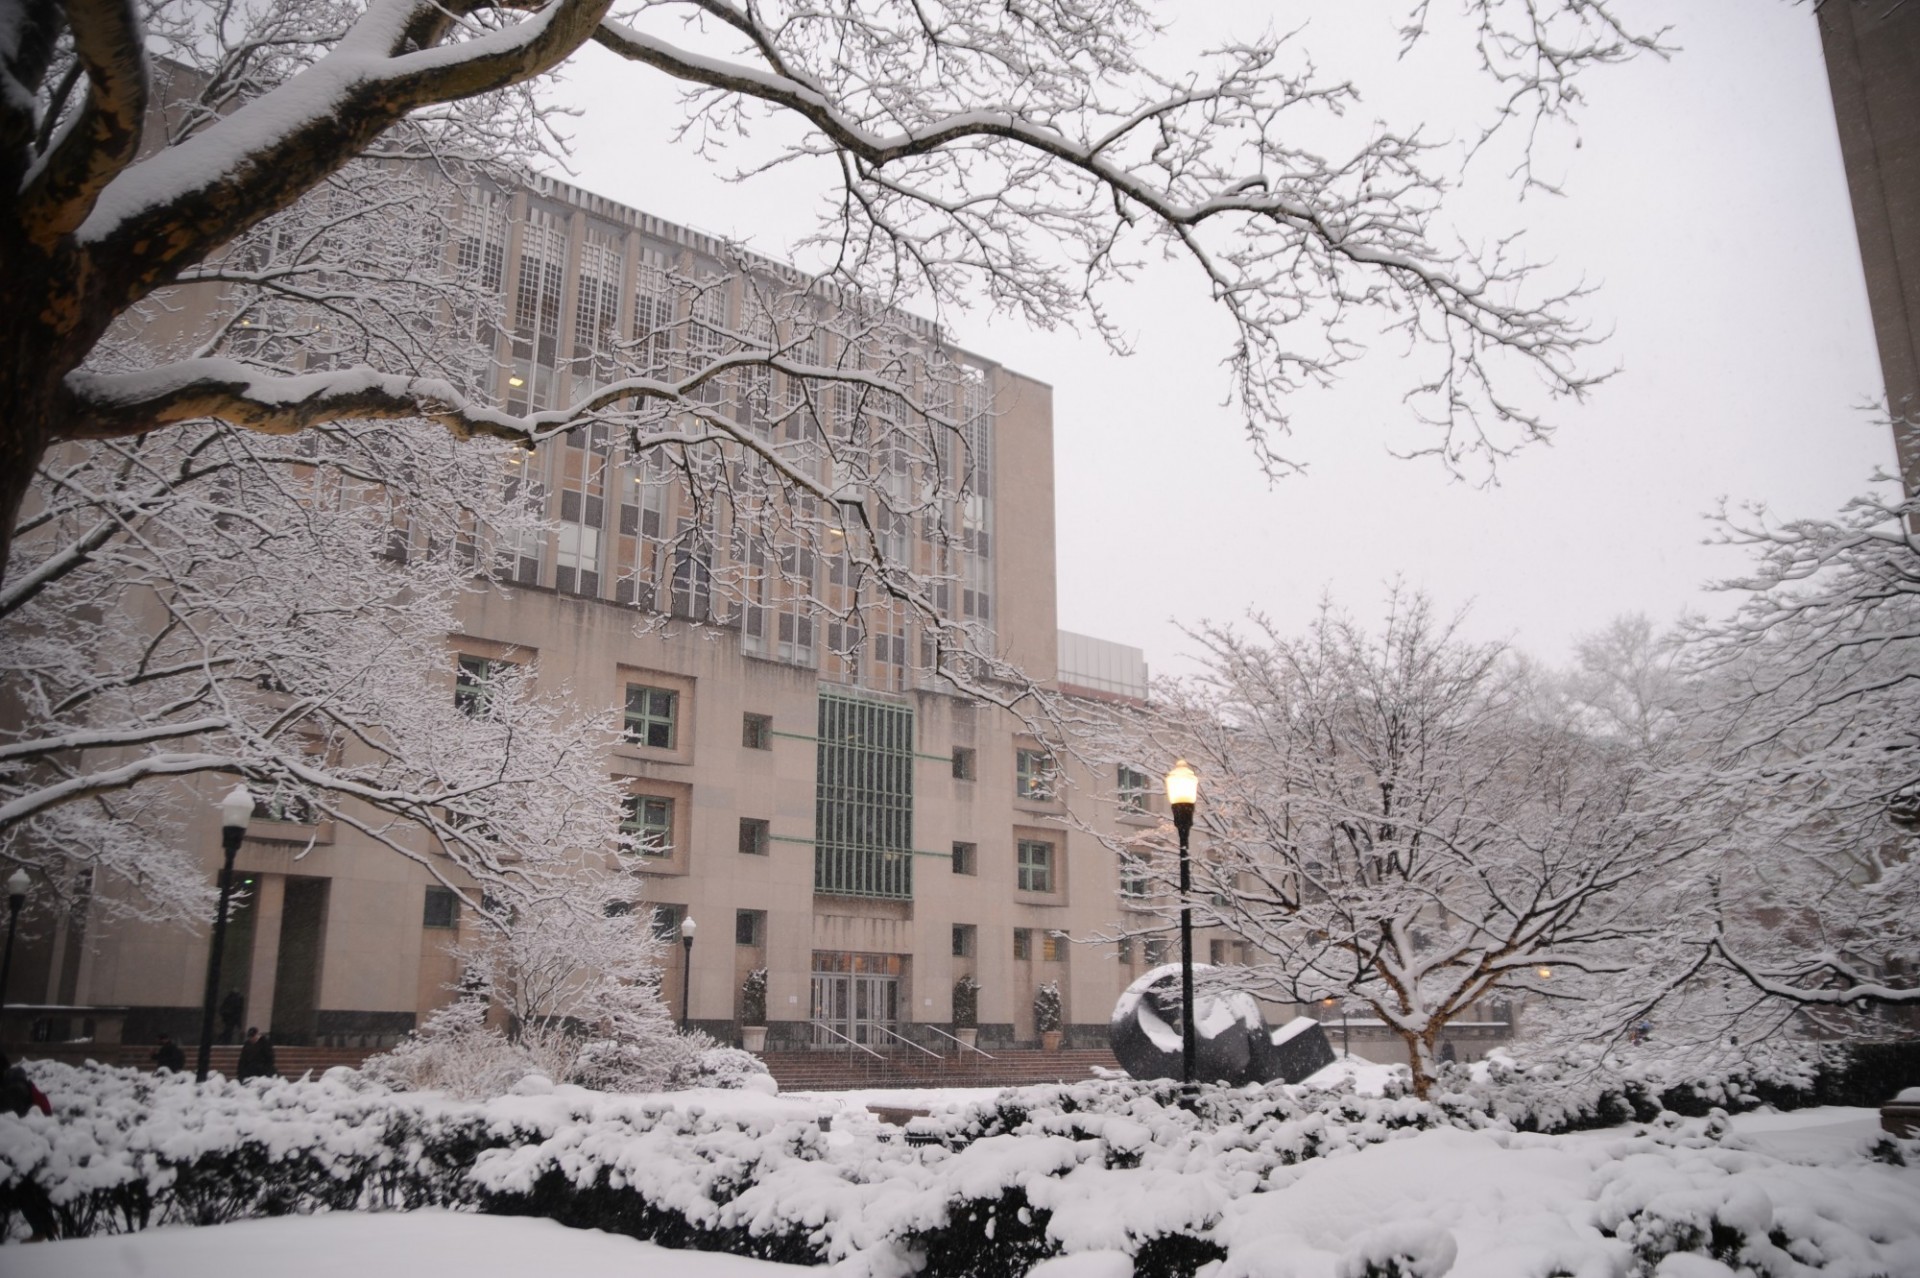 Uris Hall during a snowy day.